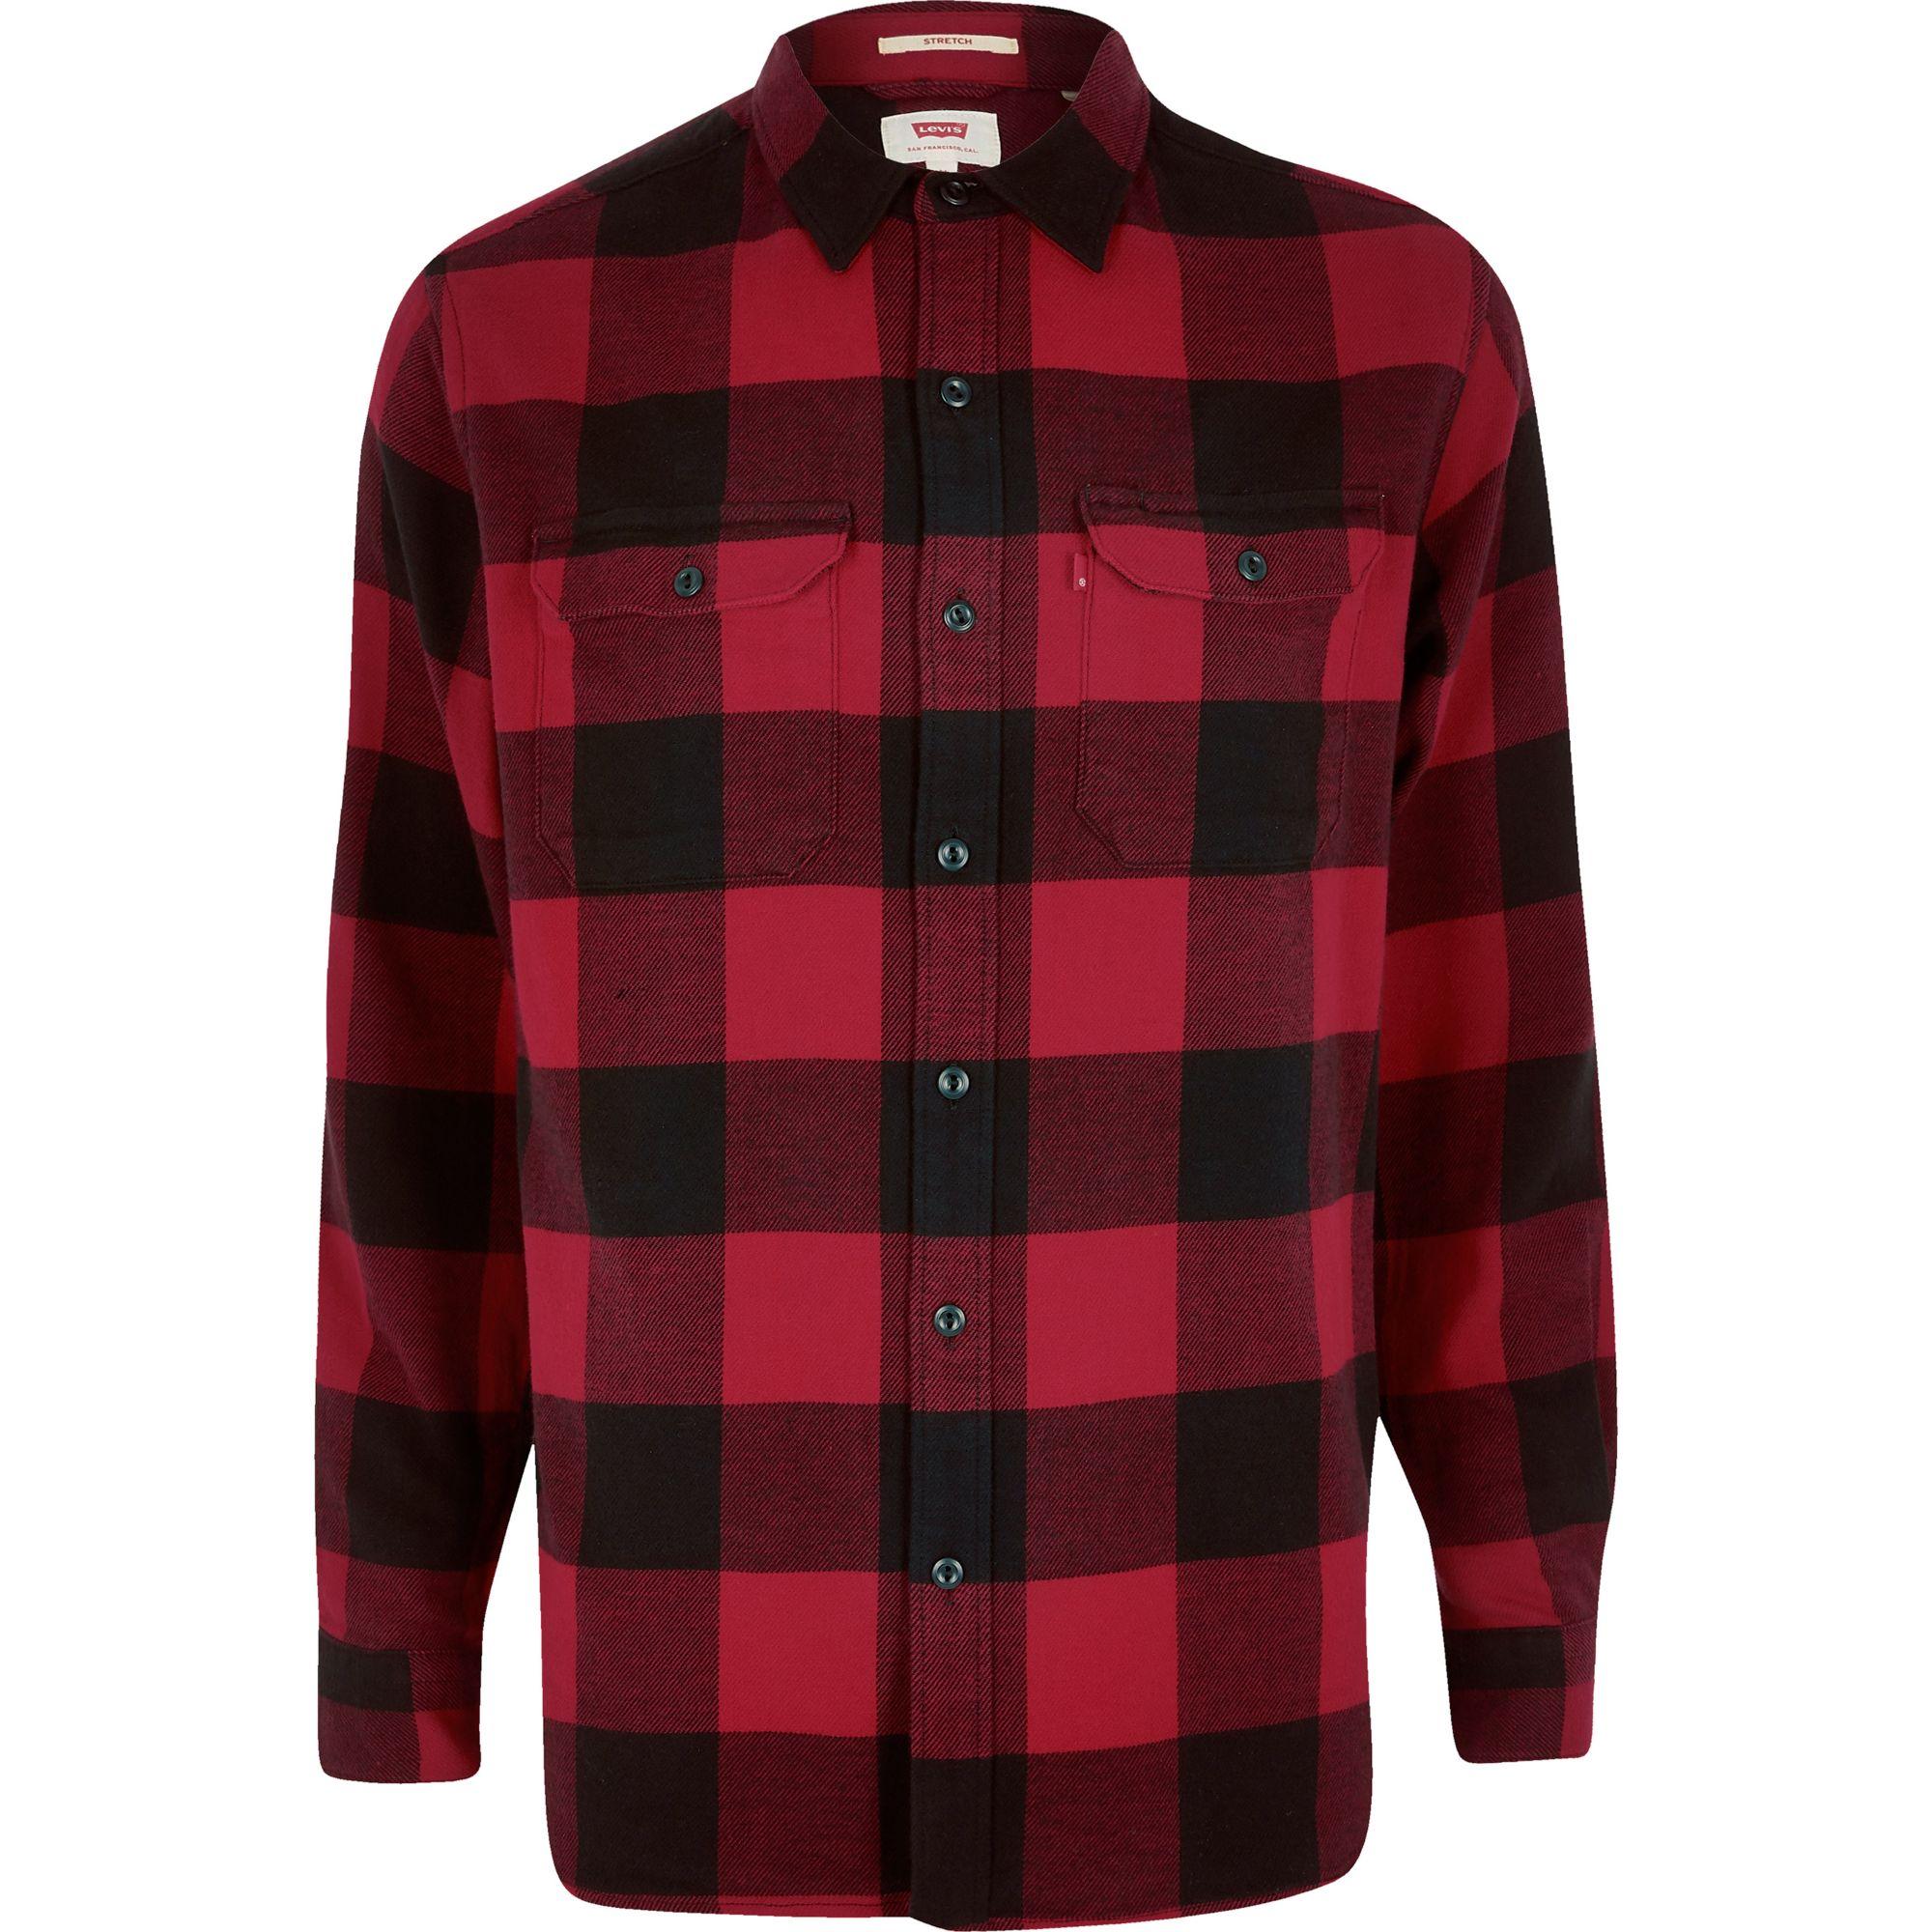 Levi's Cotton Levi's Red Check Long Sleeve Shirt for Men - Lyst